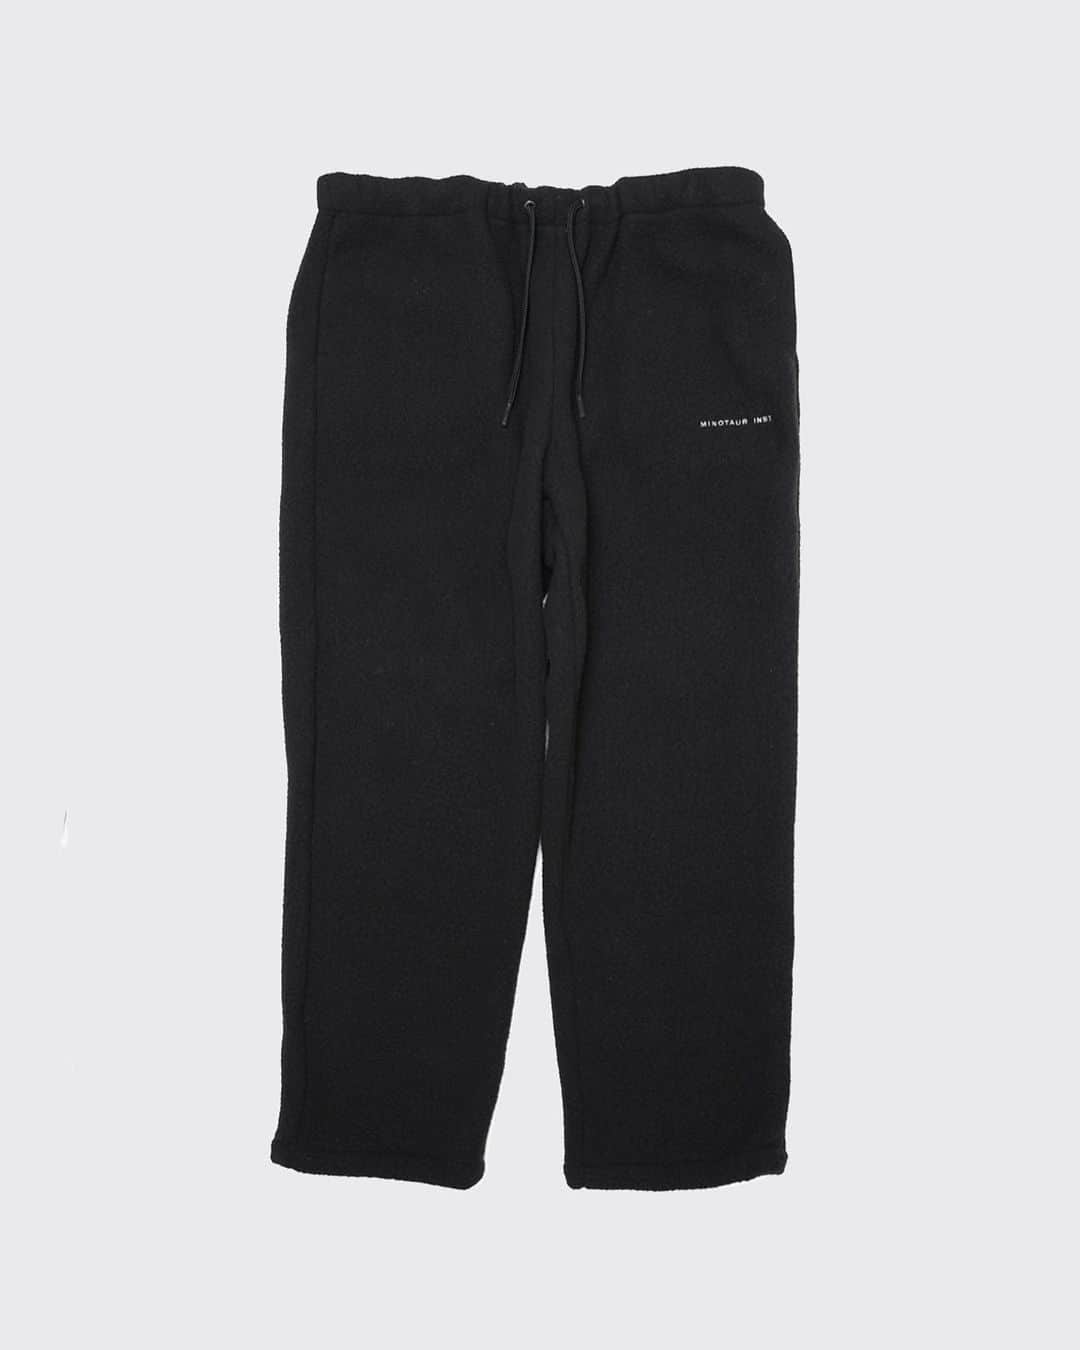 ミノトールのインスタグラム：「BOA 2W PANTS  FUNCTION : DURABILITY FEVER HEAT INSULATION LIGHT WEIGHT STRETCH    Made in Japan  現代生活で快適な素材、パーツ、ディティールによってアップデートしたボトムス。 テクニカルなボアフリース素材は、従来品に比べ驚くほどの軽量感で快適さと暖かさを兼ね備えた 生地。 摩擦に強く毛玉になりにくいタフさが加わり、外出時は勿論 室内着としての長時間の着用にも対応。 ドローコードでの裾幅の調整により2WAYシルエットに対応。 同素材アイテムとのセットアップ可能。  Bottoms updated with materials, parts, and details that are comfortable for modern life. The technical boa fleece material is surprisingly lightweight compared to conventional products, and is both comfortable and warm. It has added toughness that resists friction and pilling, making it suitable for long-term wear as indoor wear as well as when going out. It supports a 2-way silhouette by adjusting the hem width with a drawcord. Can be set up with items made of the same material.  SET-UP series : BOA ZIP HOOD  #minotaur_inst #minotaurinst #minotaur #ミノトールインスト #ミノトール #functional #comfortable #miyashitapark #tech #techwear #テック #relaxsmart #リラックススマート #relaxsmartwear #リラックススマートウェア #boa #inoutwear #madeinjapan #setup」